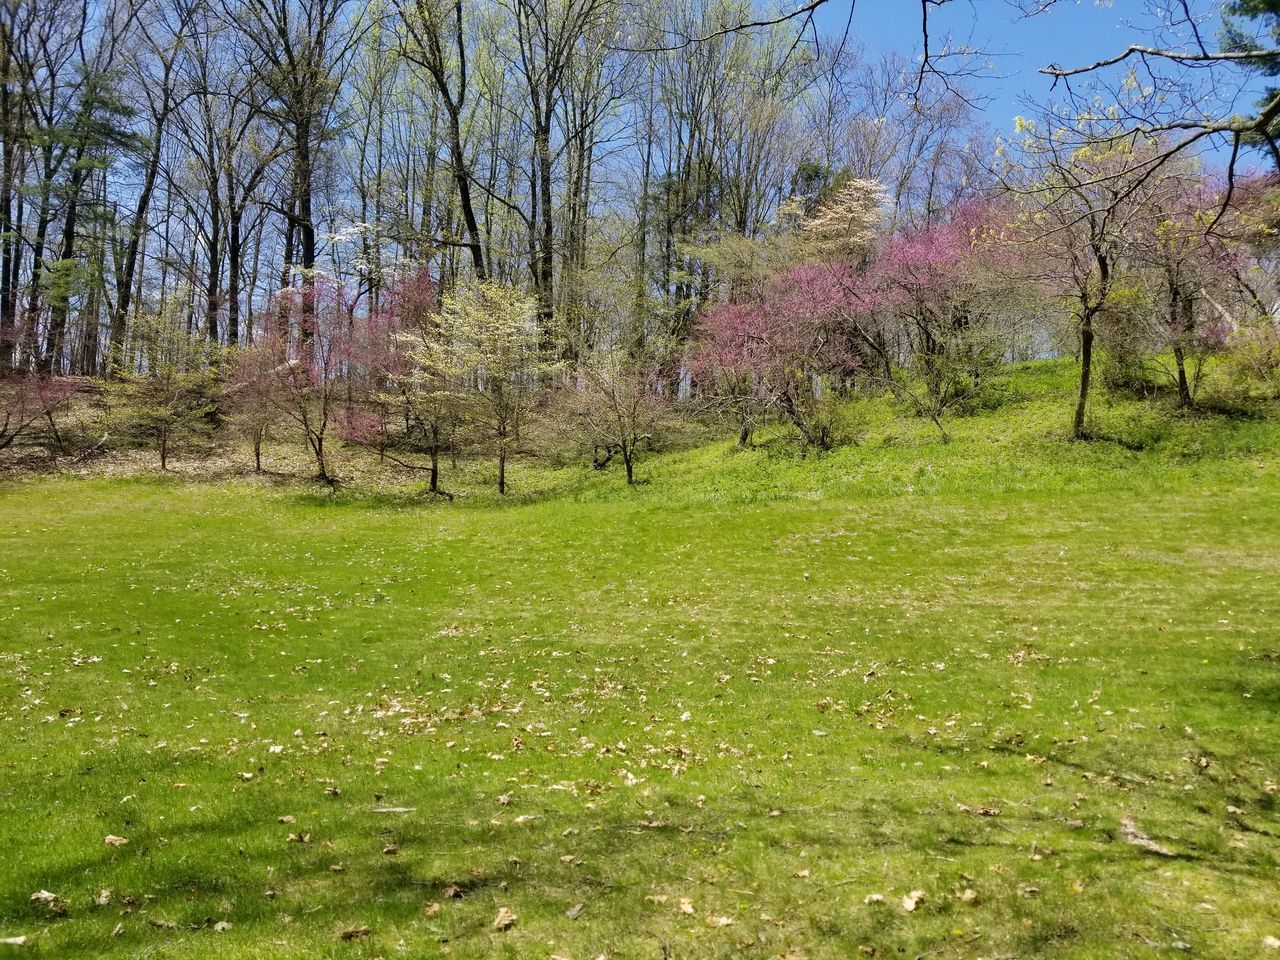 SCENIC VIEW OF GRASSY FIELD AND TREES